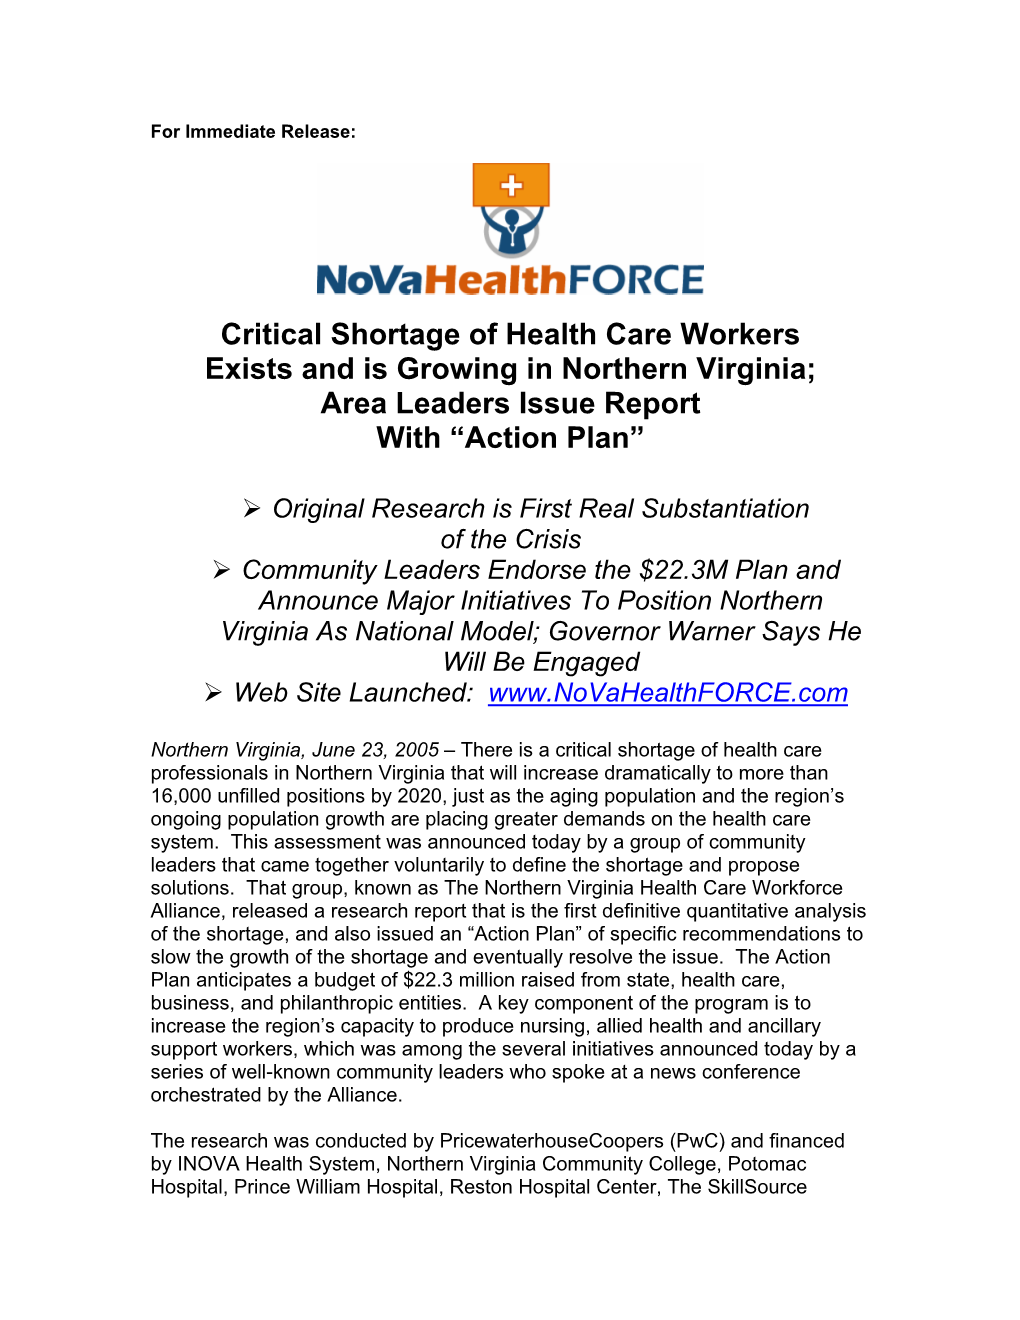 Critical Shortage of Health Care Workers Exists and Is Growing in Northern Virginia; Area Leaders Issue Report with “Action Plan”